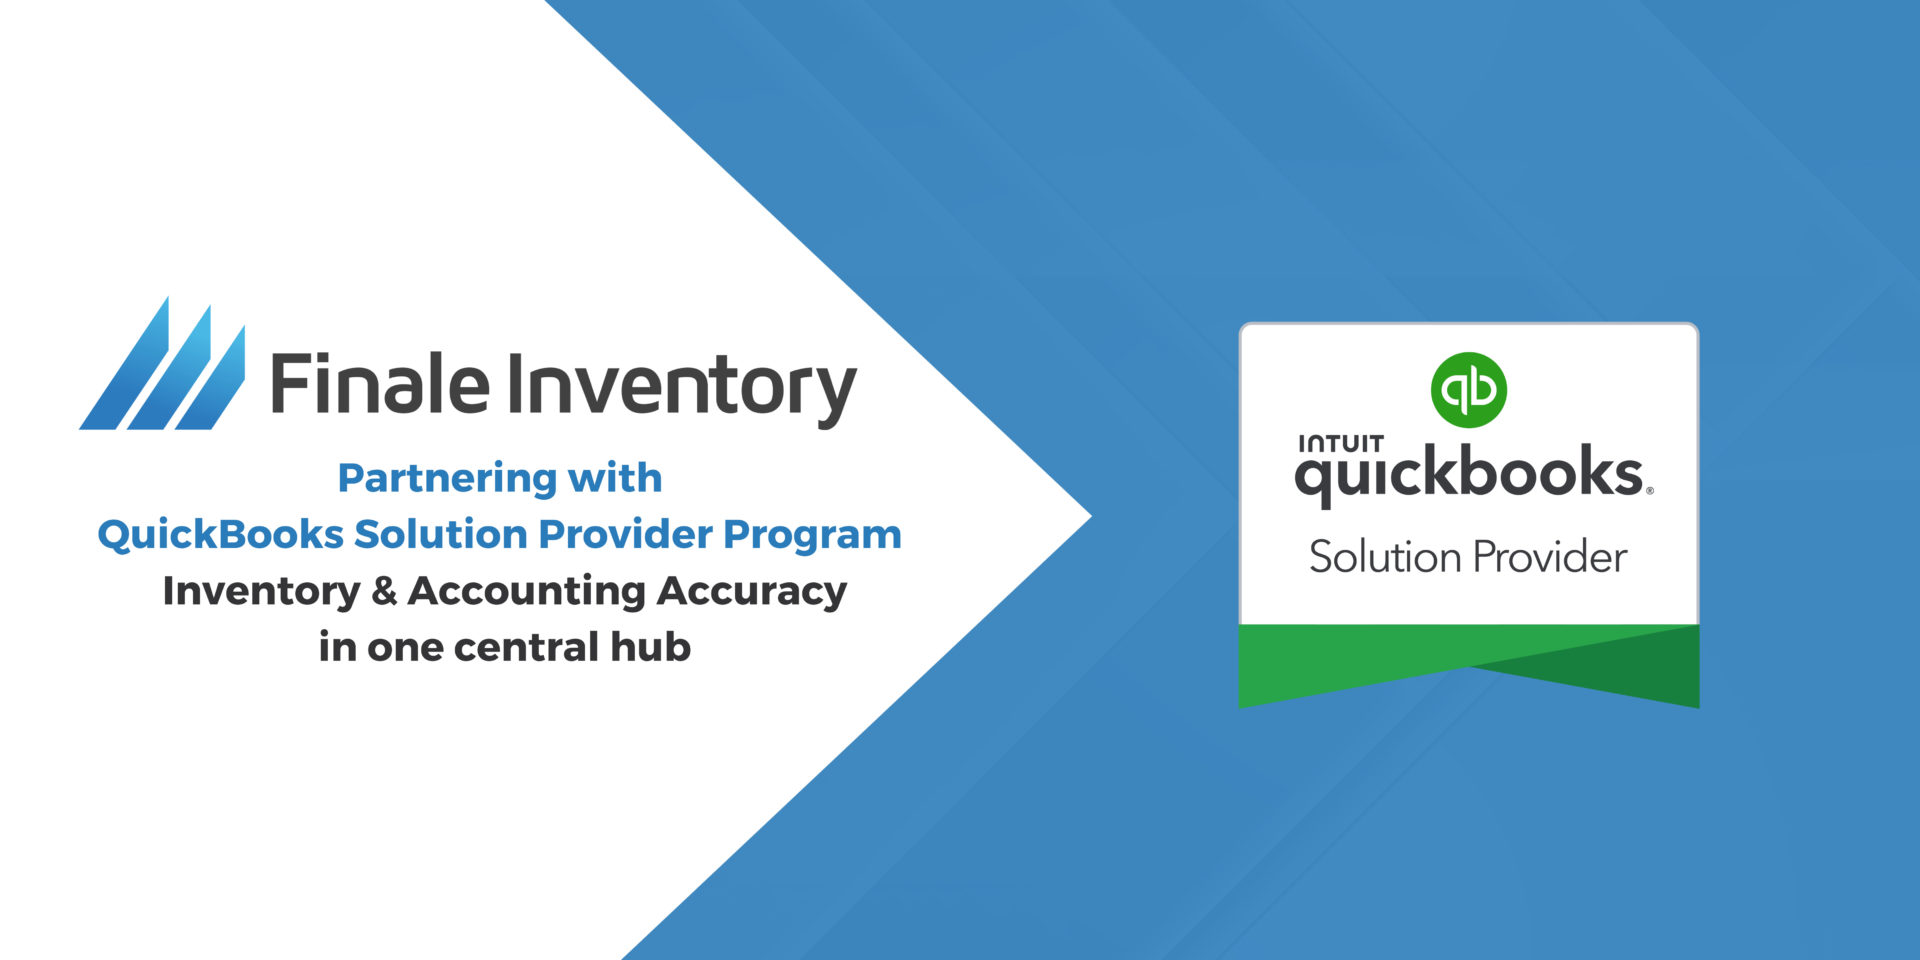 QuickBooks Solution Provider Program Helps Finale Users with Inventory Accuracy